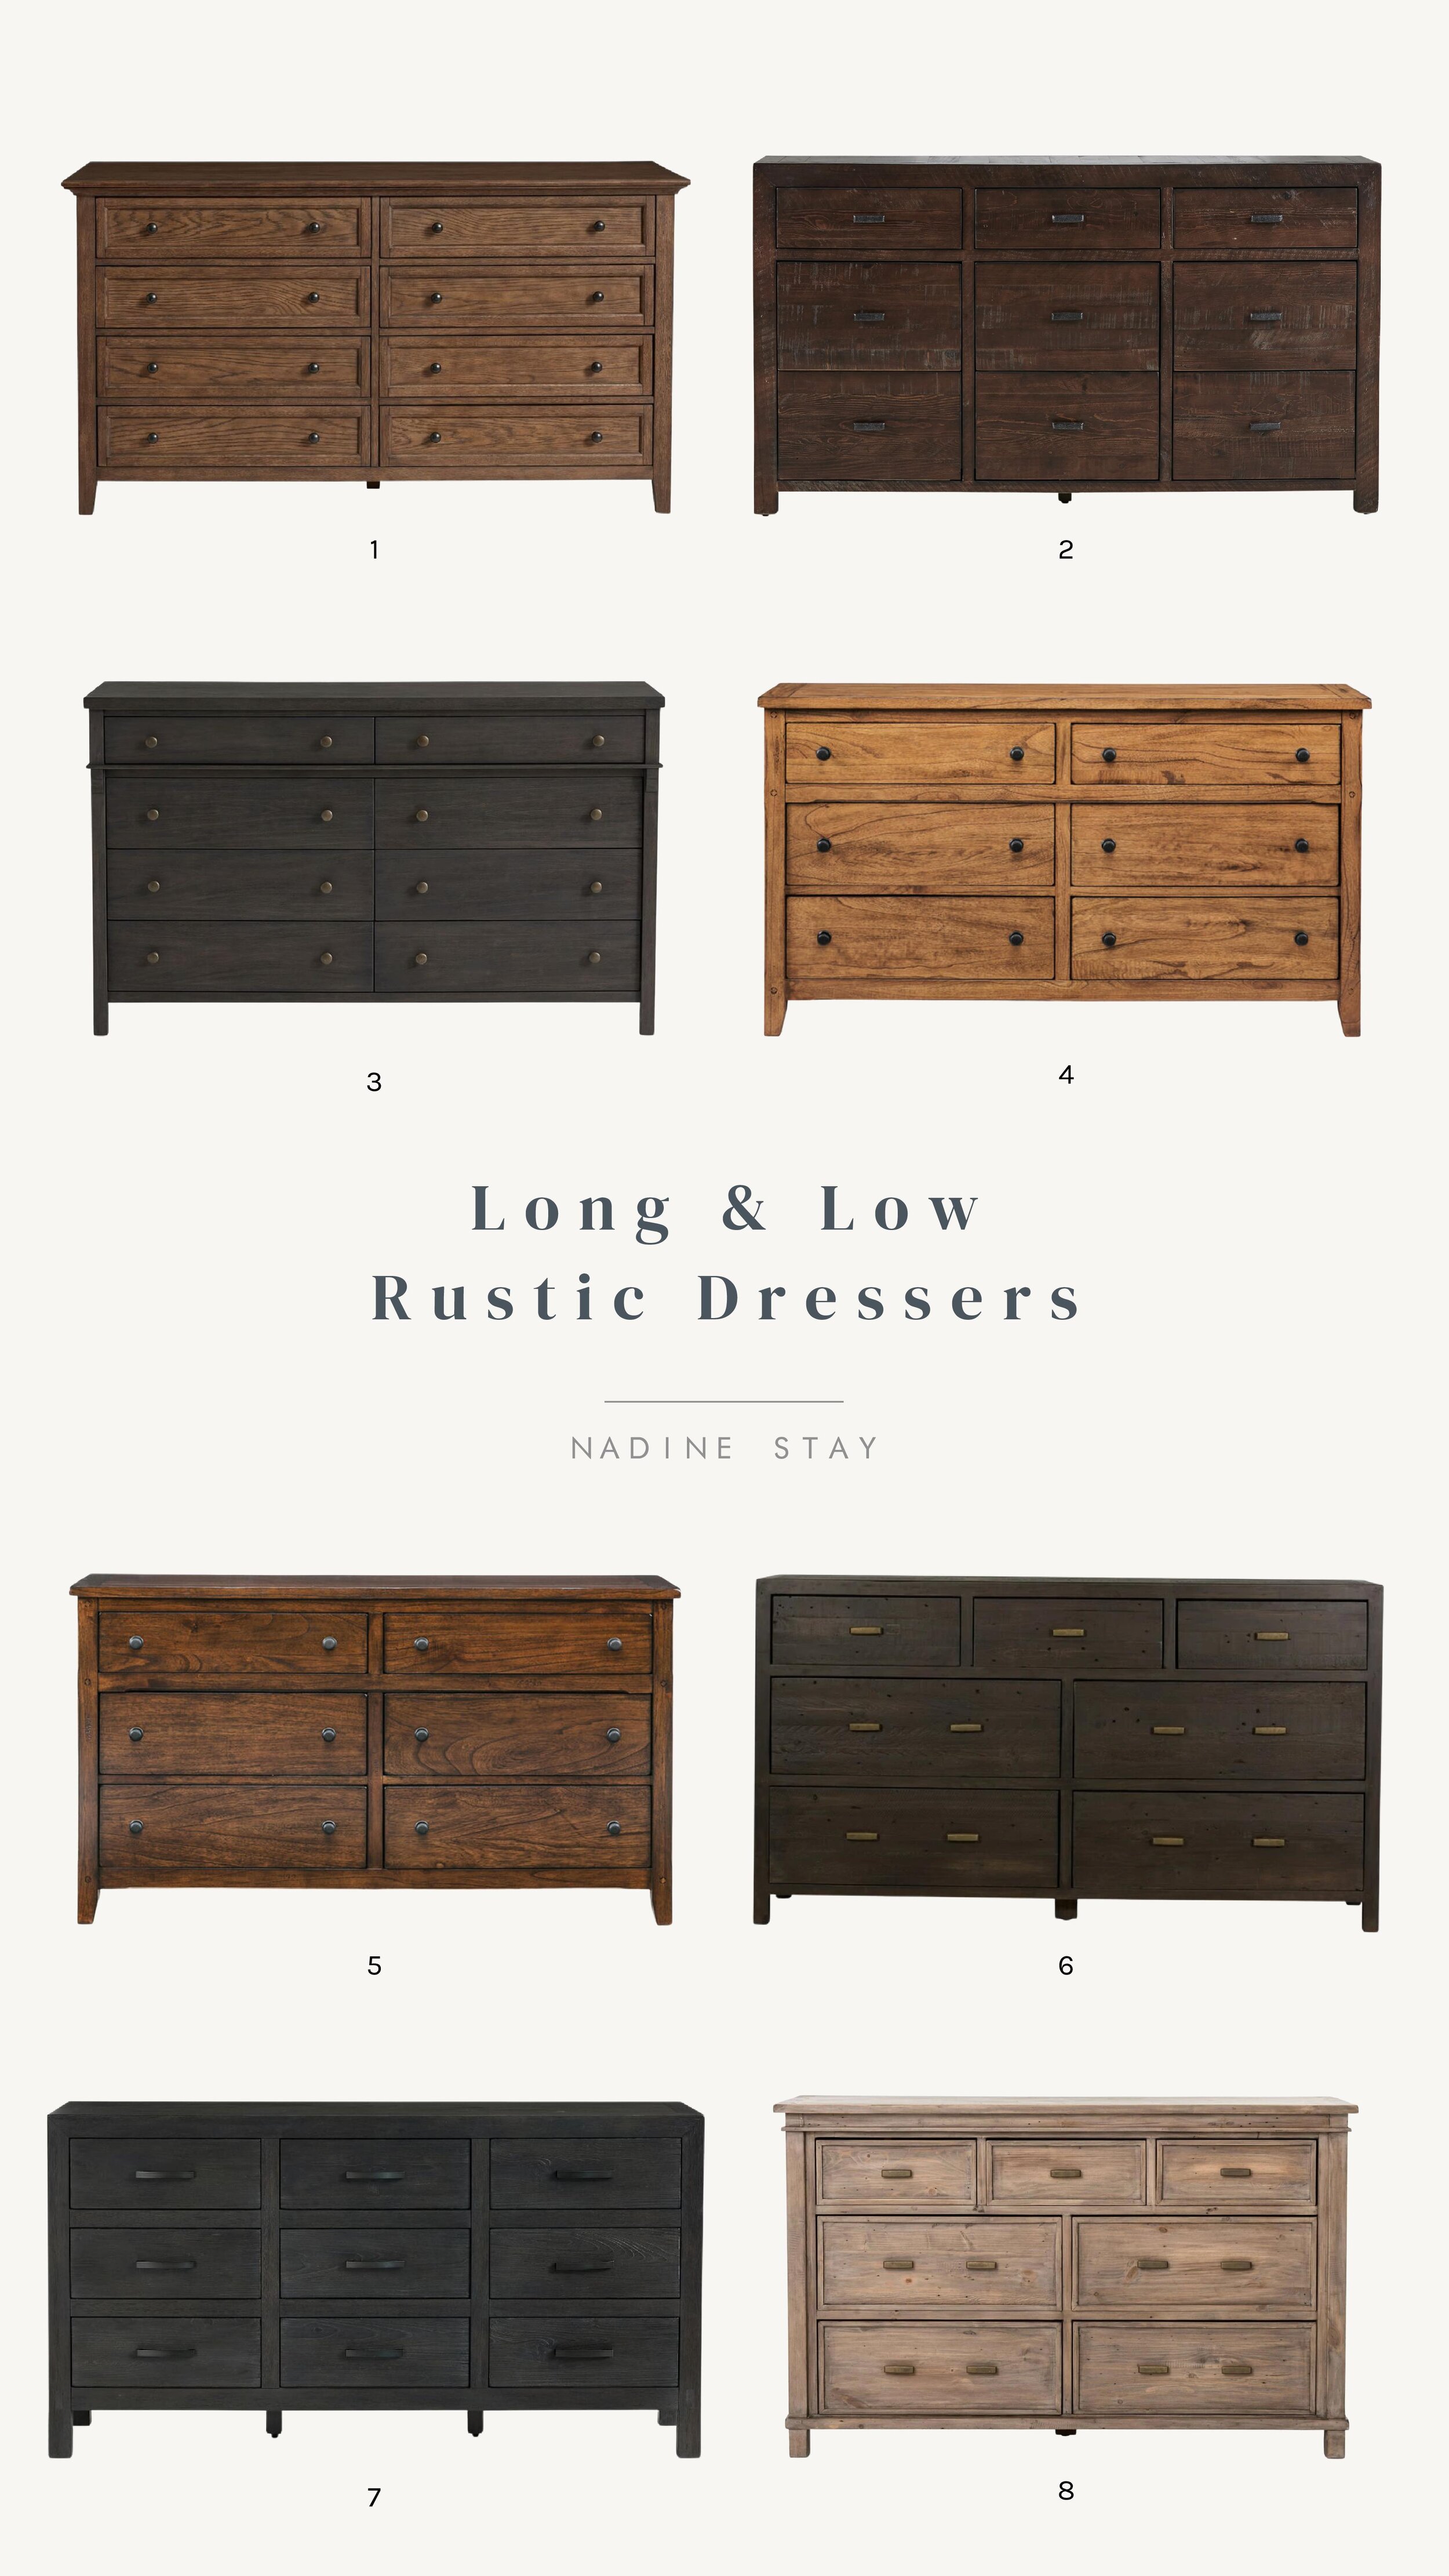 Long and Low Rustic Dresser Round Up | Nadine Stay - Wood dressers with inset drawers and wood knobs. Dresser sources for bedroom storage.